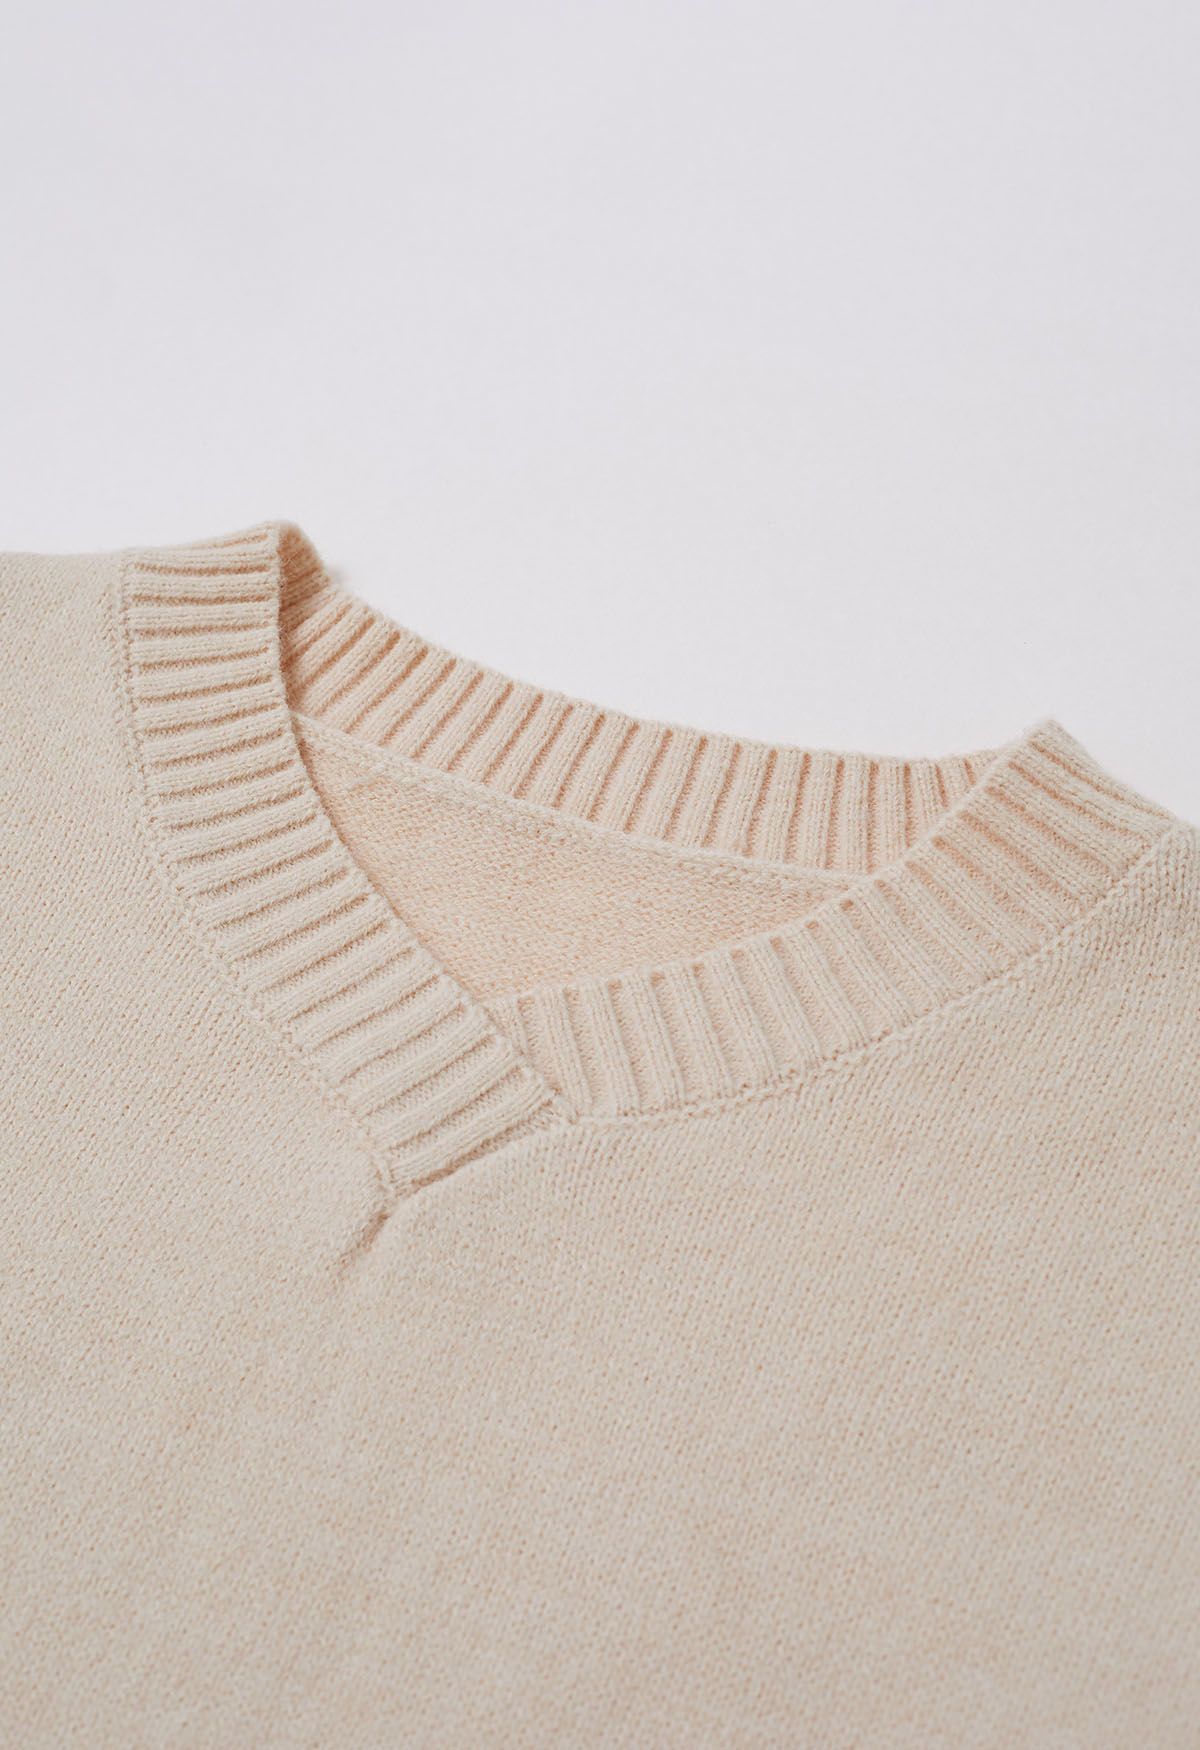 Dropped Shoulder Side Slit Slouchy Knit Sweater in Cream - Retro, Indie ...